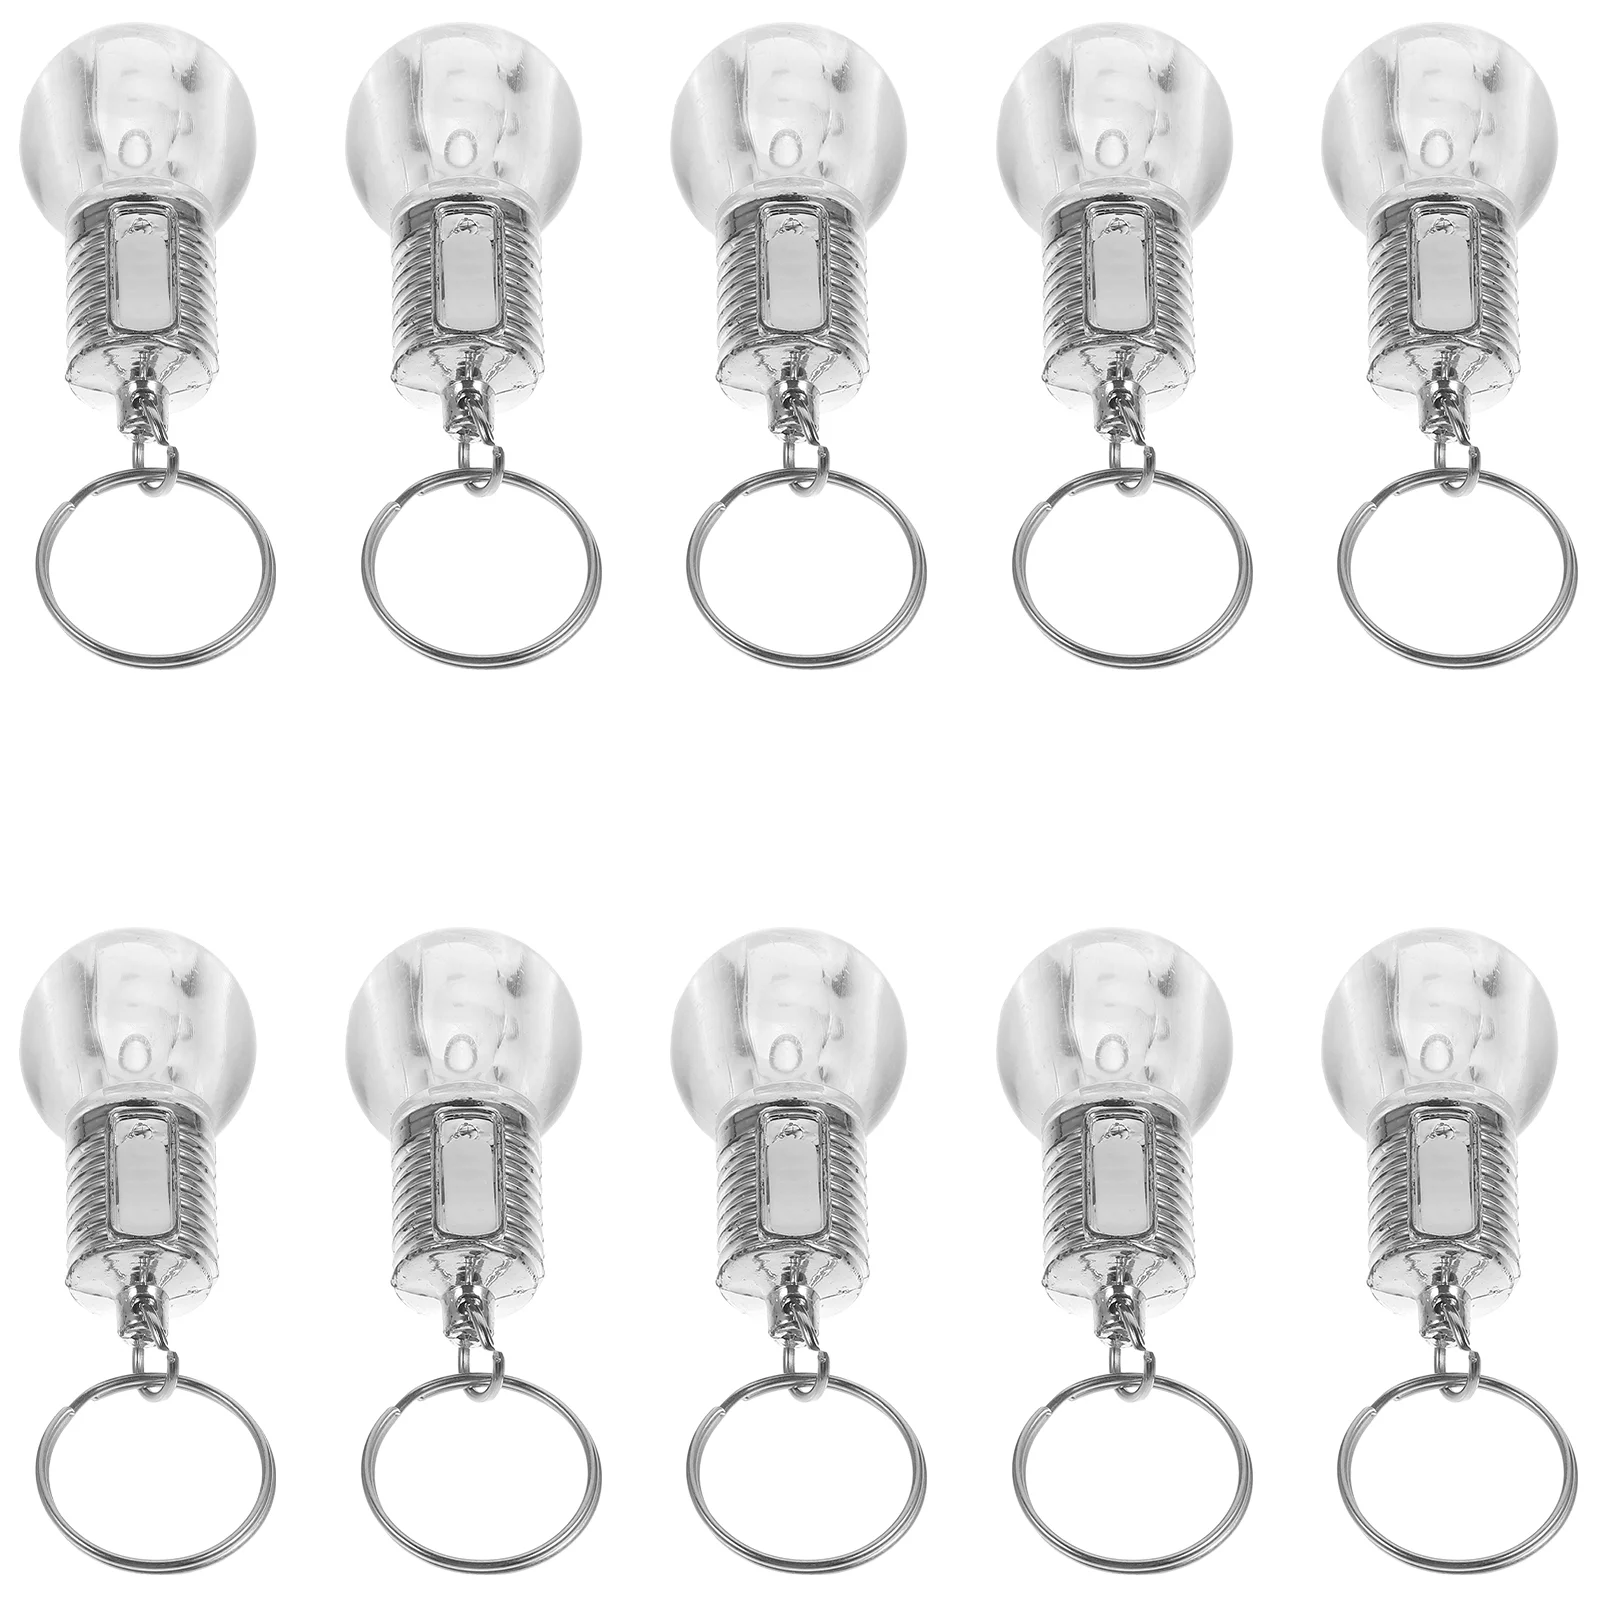 

10 Pcs Key Fob Unique Design Keychain Clear Lamp Torch Keyring Light Bulb LED Colorful Changing